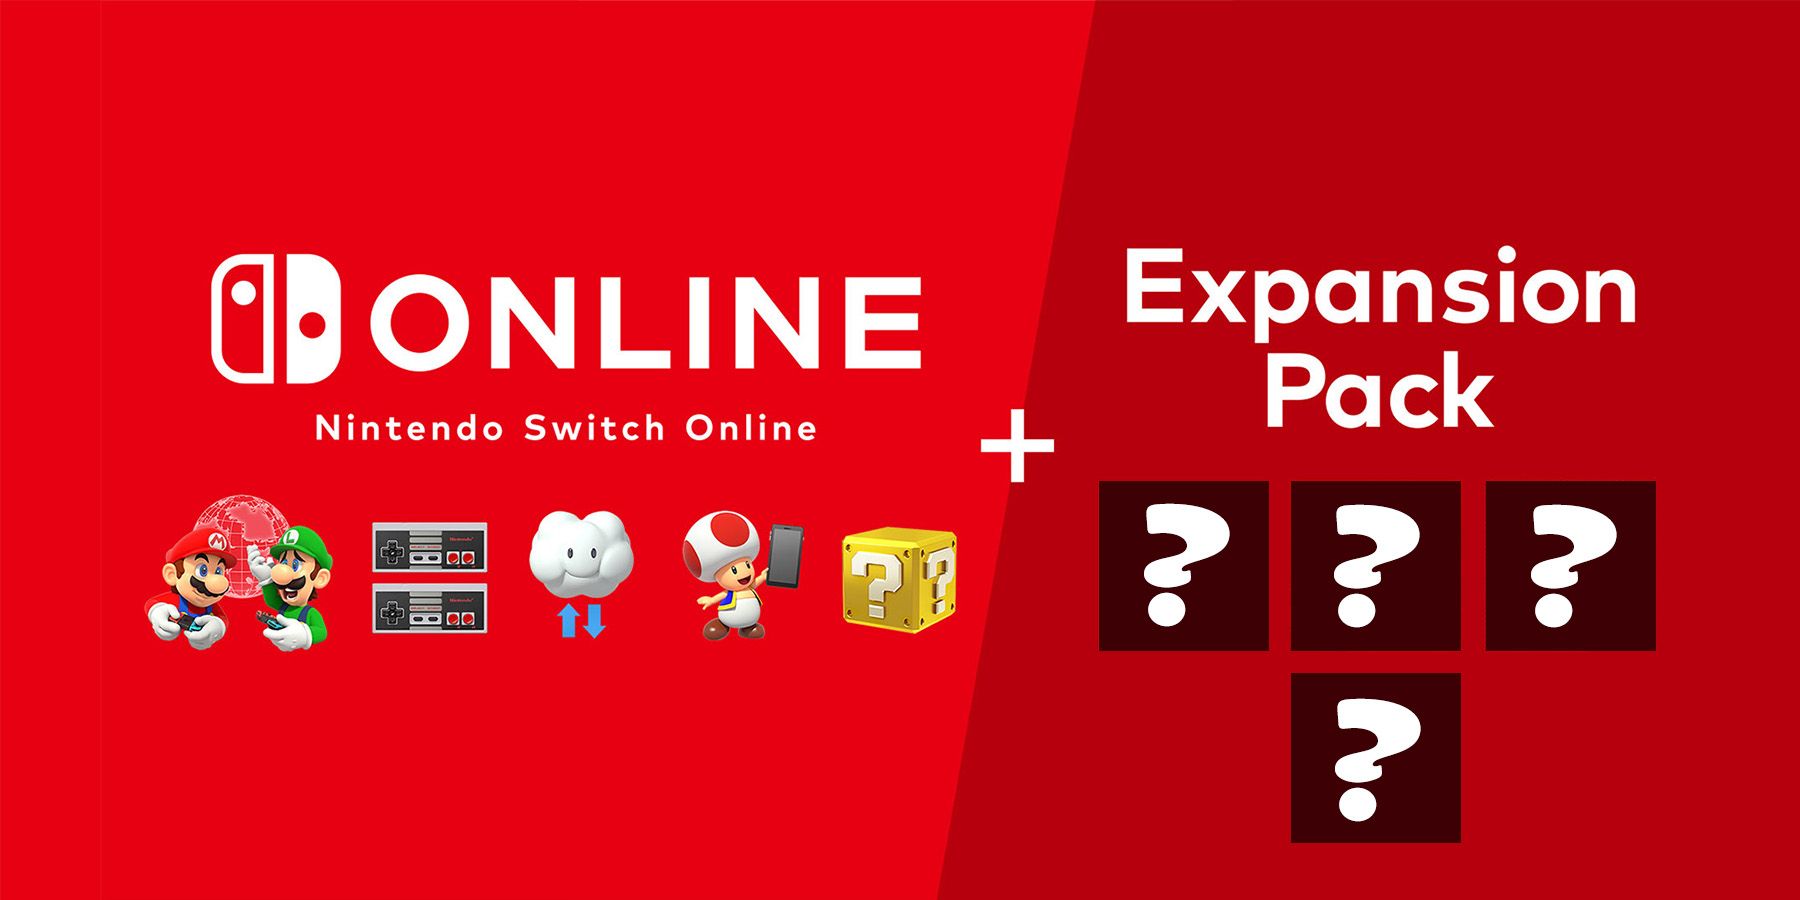 nintendo-switch-online-expansion-pack-update-adds-4-more-games